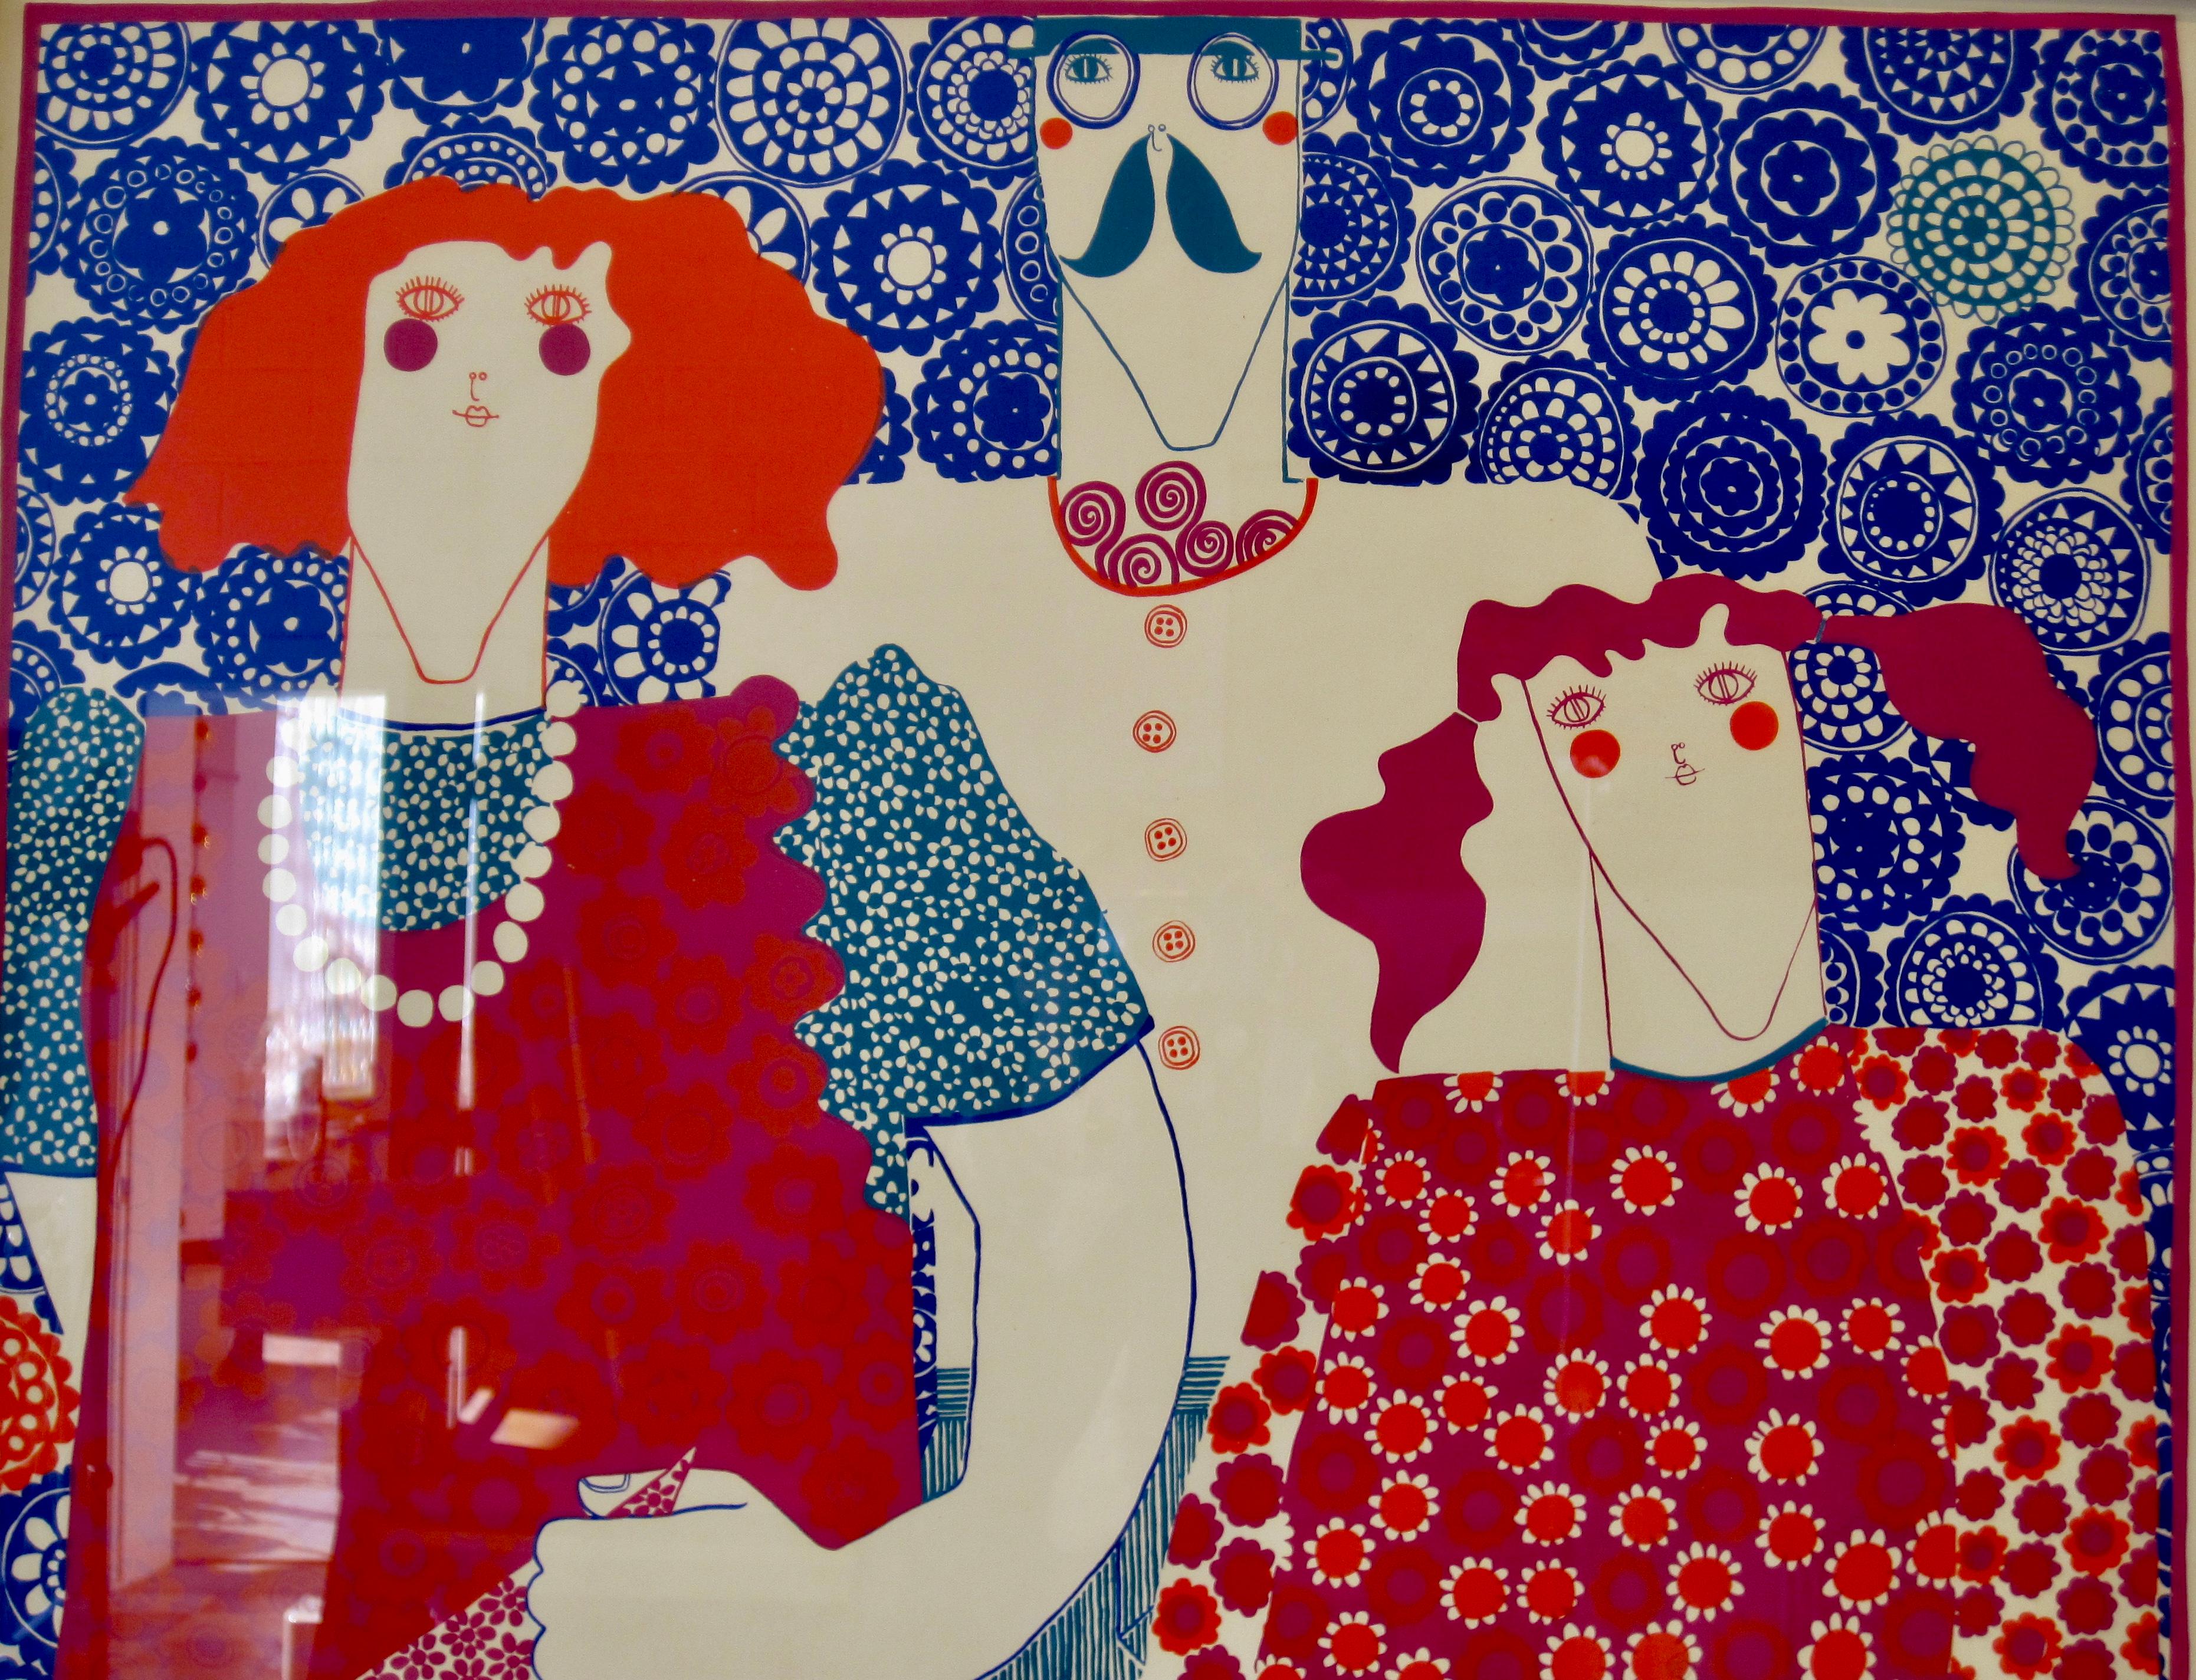 Mod Era Vividly Colored Silkscreen on Paper by Myfanwy Phillips In Good Condition For Sale In Ferndale, MI